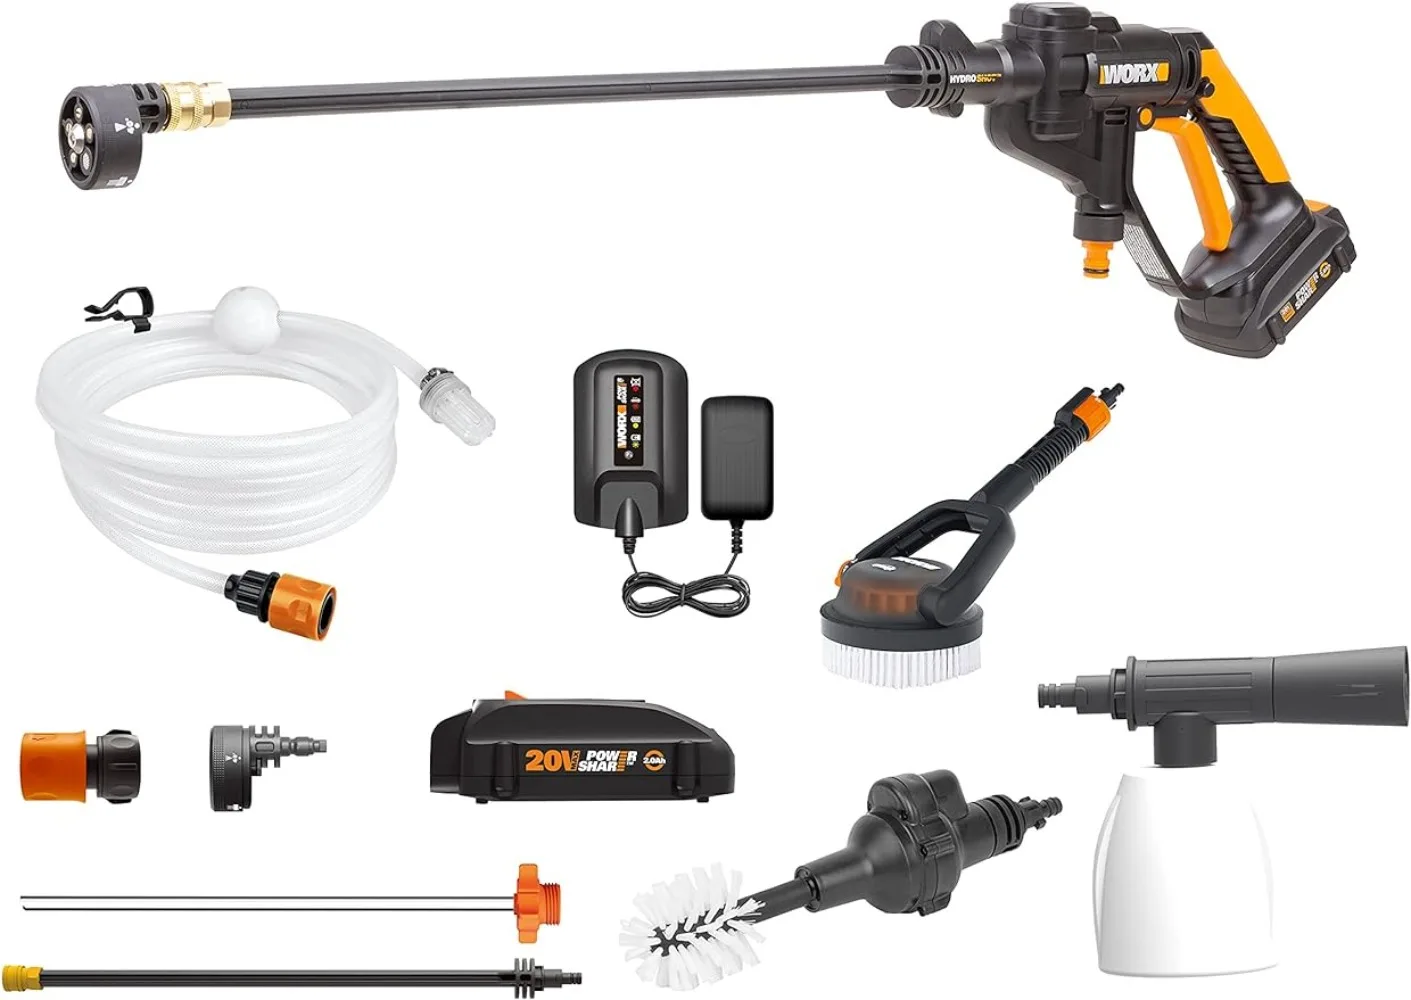 

WORX 20V Cordless Pressure Washer WG625.4 Portable Power Hydroshot Cleaner Suitable for Car Washing & Surface Cleaning w/ Access